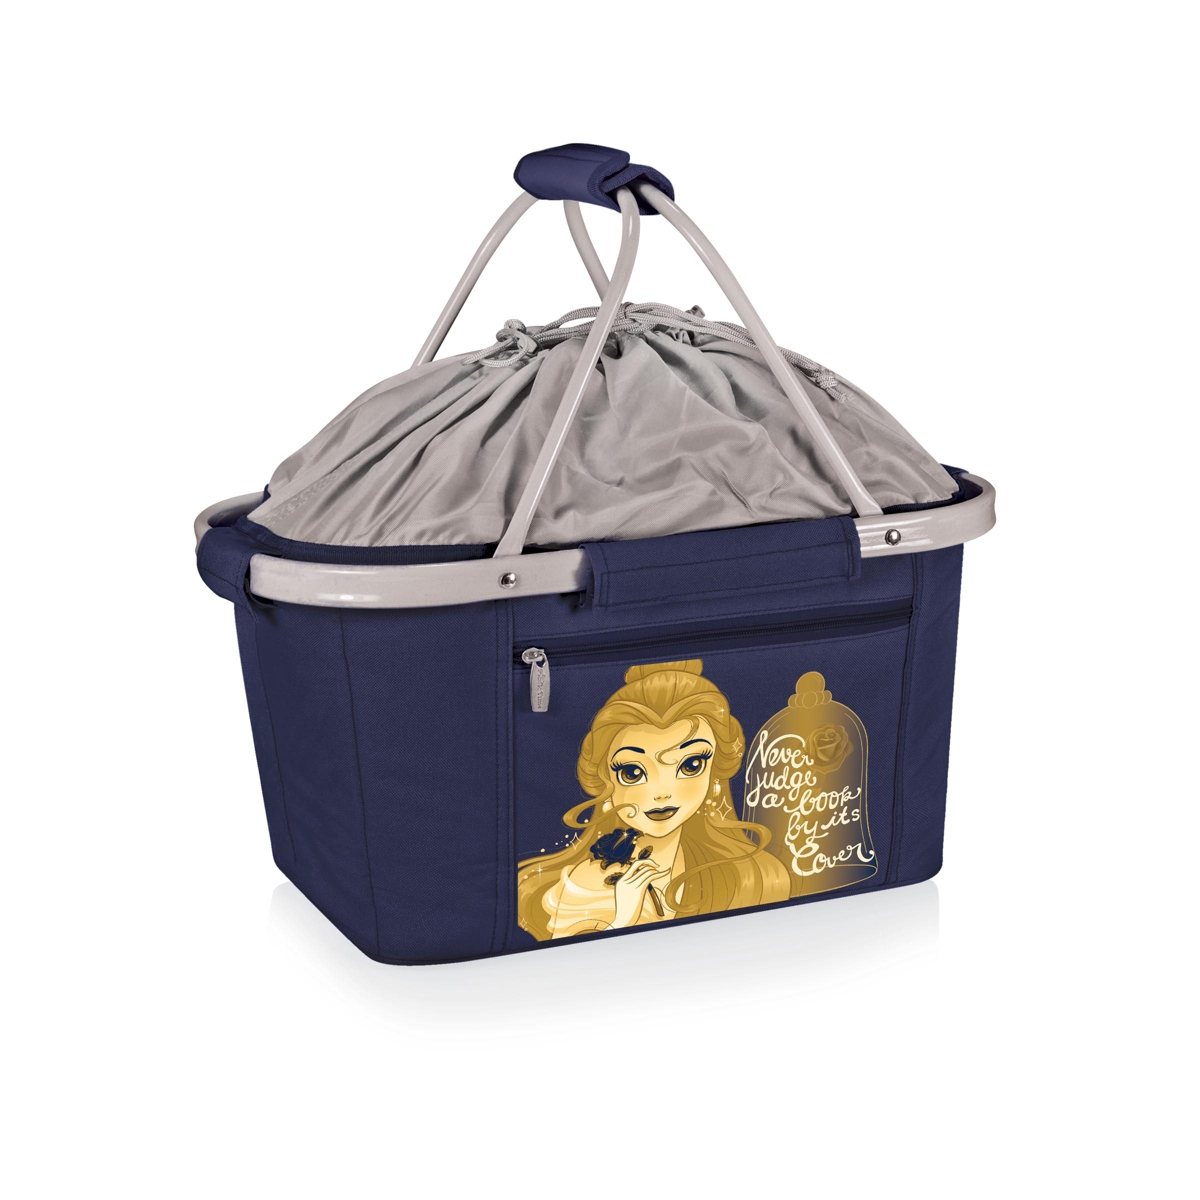 by Picnic Time Disney's Beauty and the Beast Metro Basket Collapsible Cooler Tote - Navy